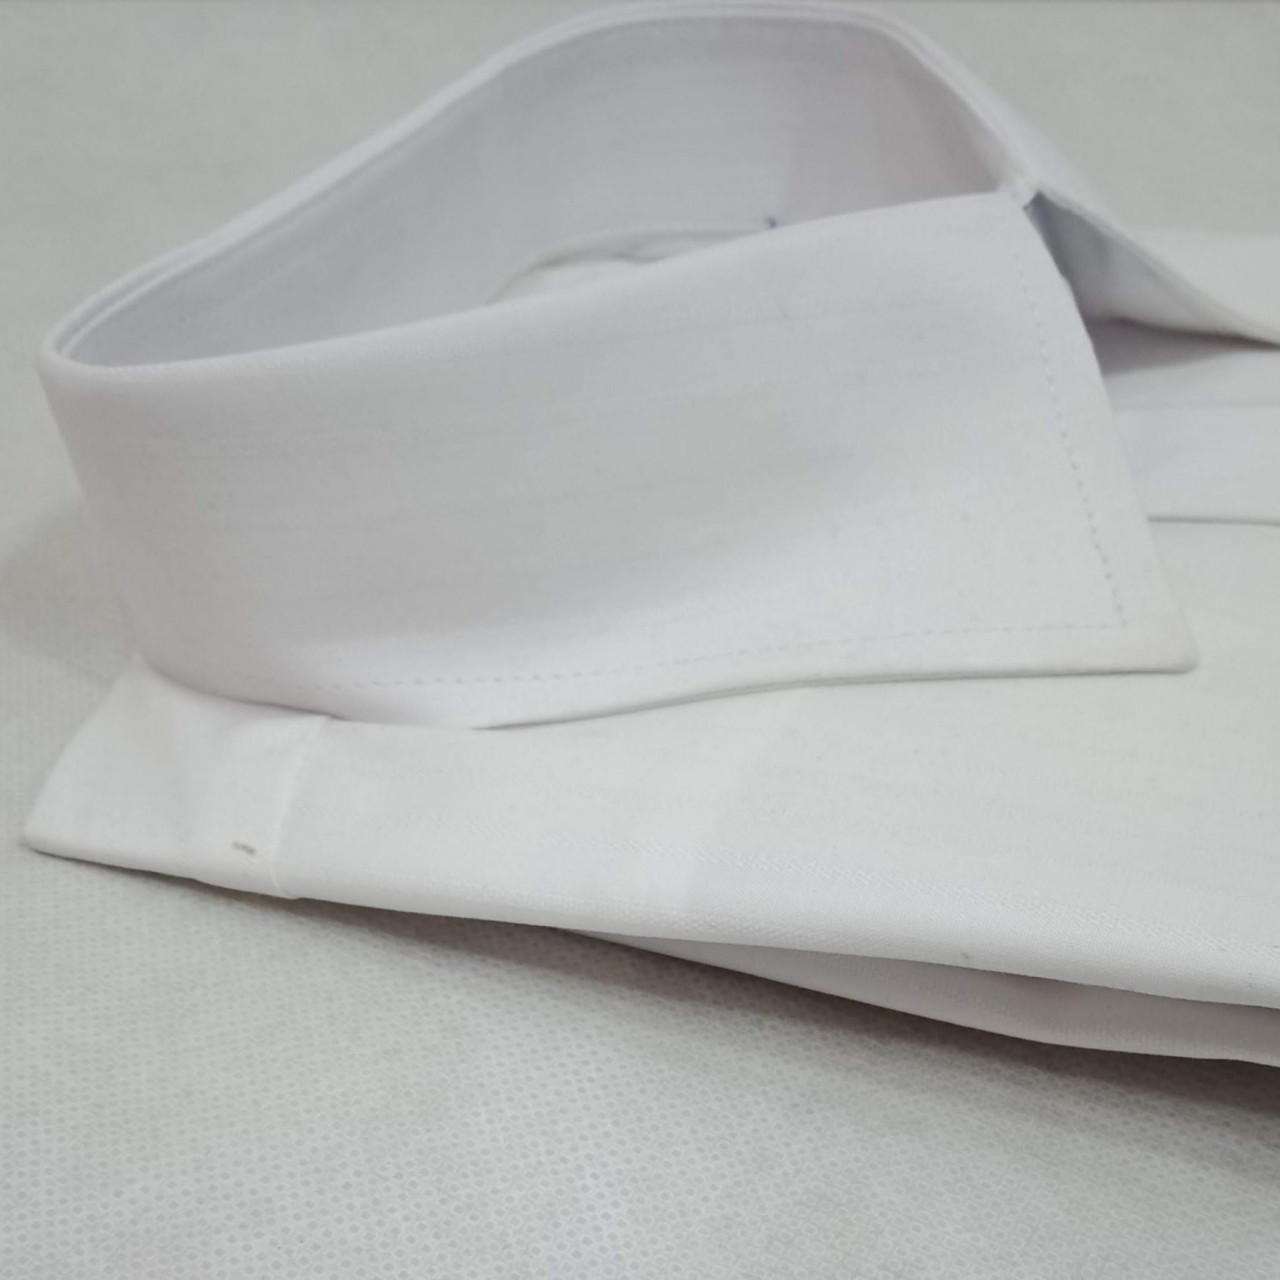 White Formal Shirt For Men - Self Lining - Double Needle Stitching